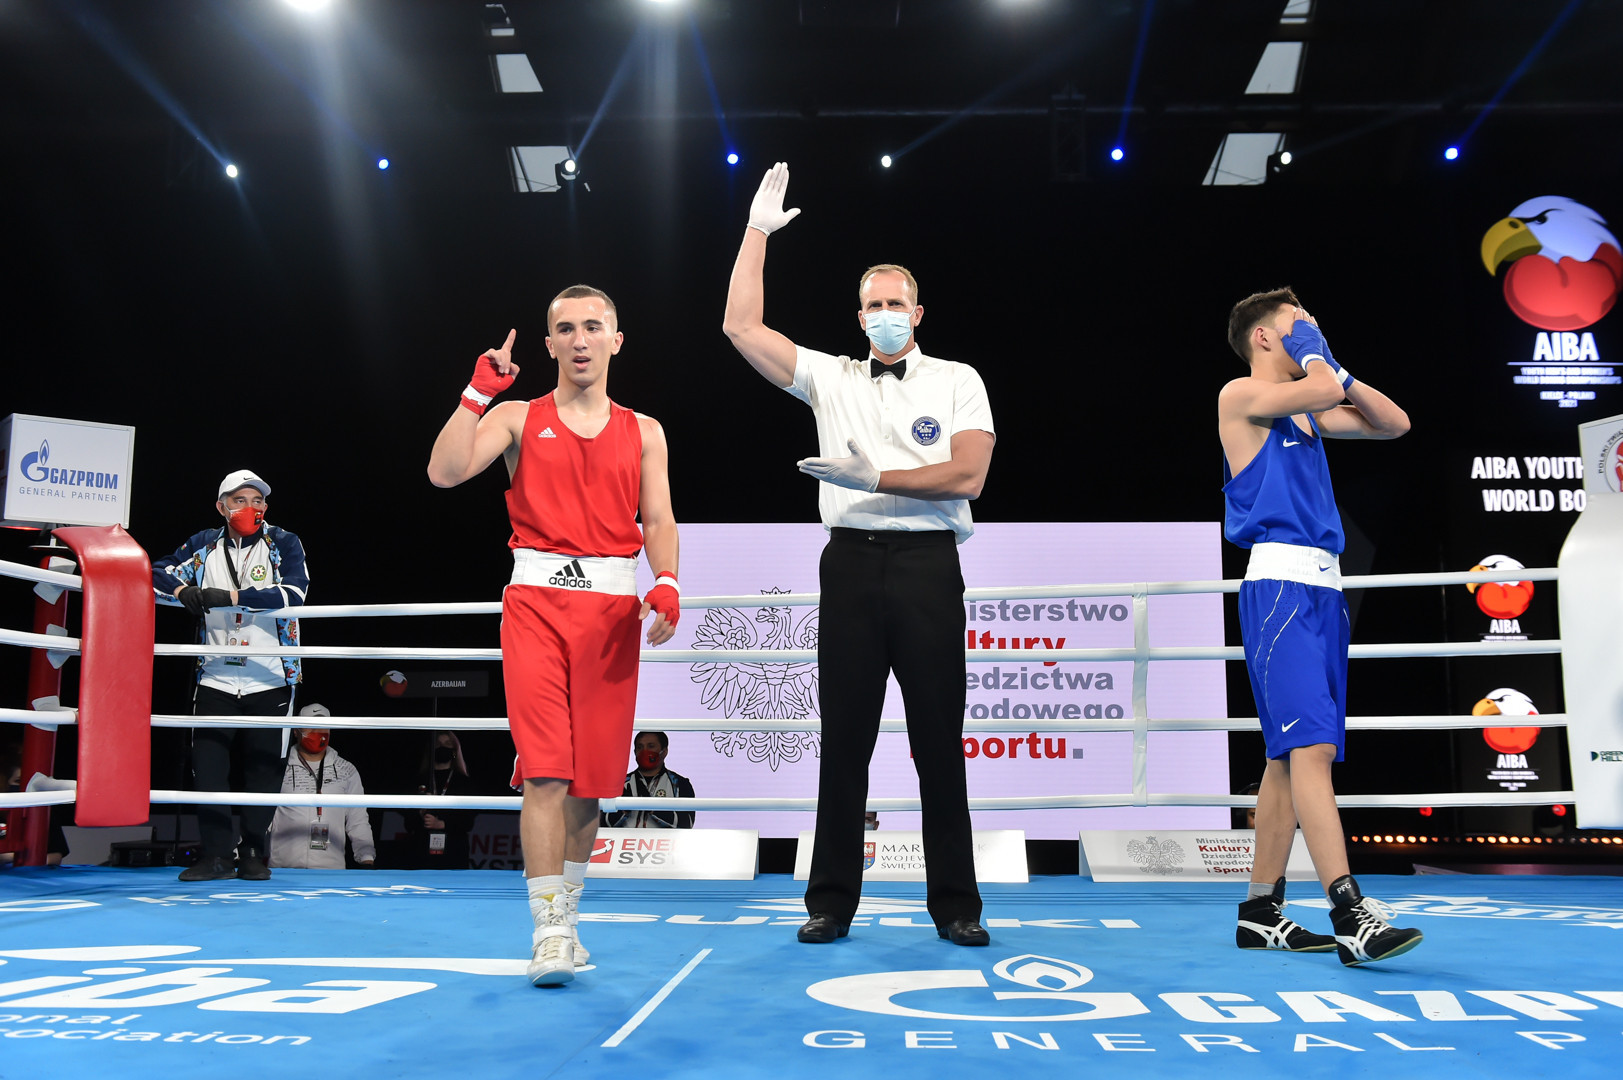 There was early disappointment for some in the early bouts ©AIBA